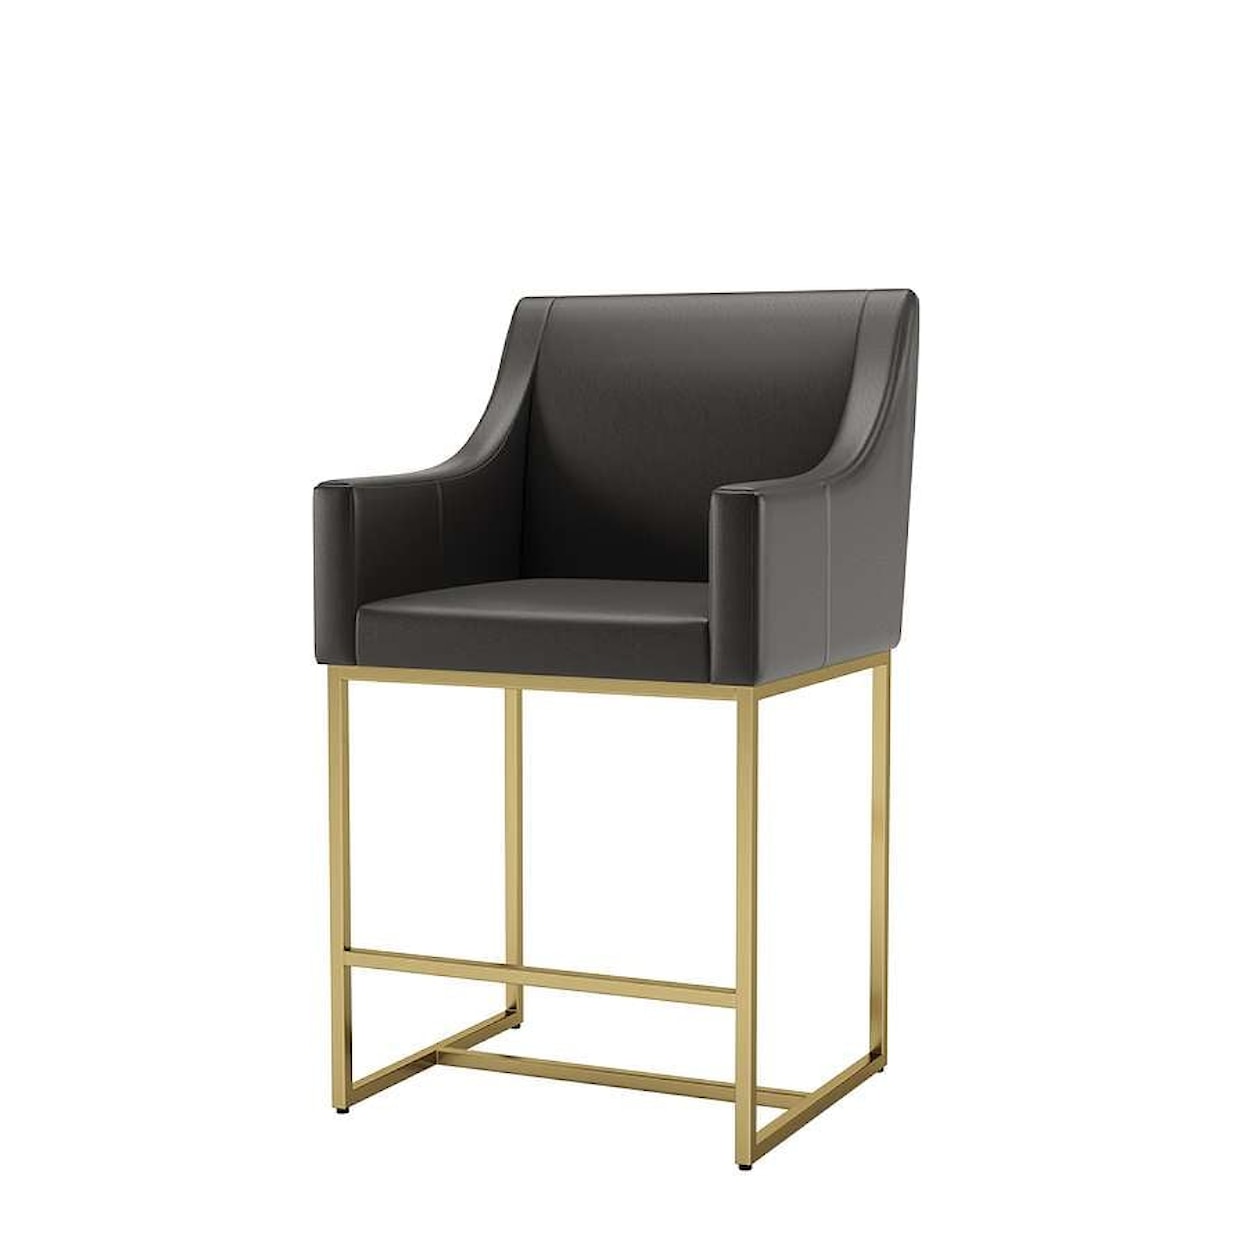 Canadel Modern Upholstered fixed stool